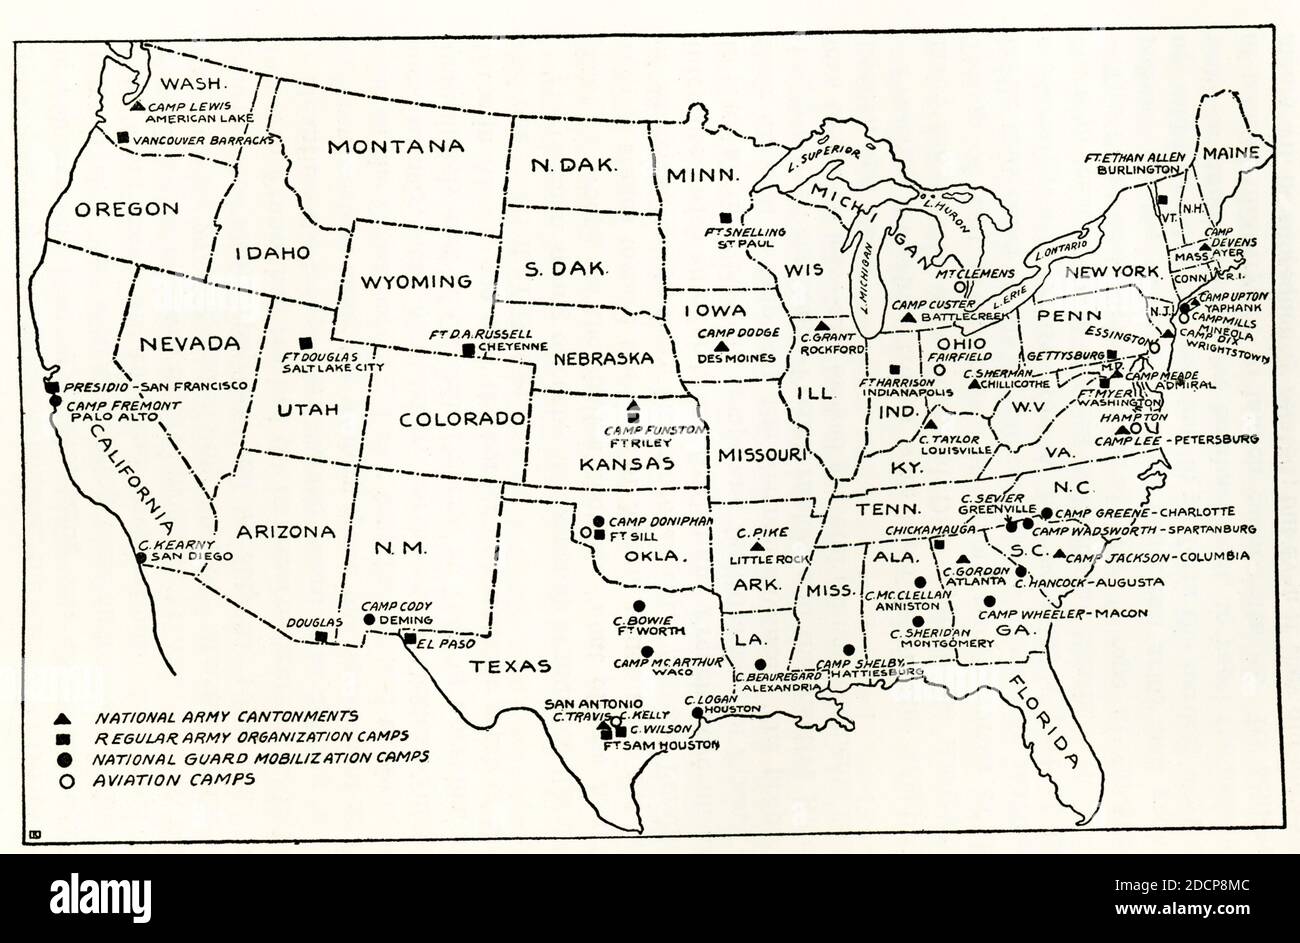 Military Establishments in United States.  Legend: Black triangle: National Army cantonments; Black square: Regular Army Organization Camps; Black circle: National Guard Mobilization Camps; Circle: Aviation Camps Stock Photo